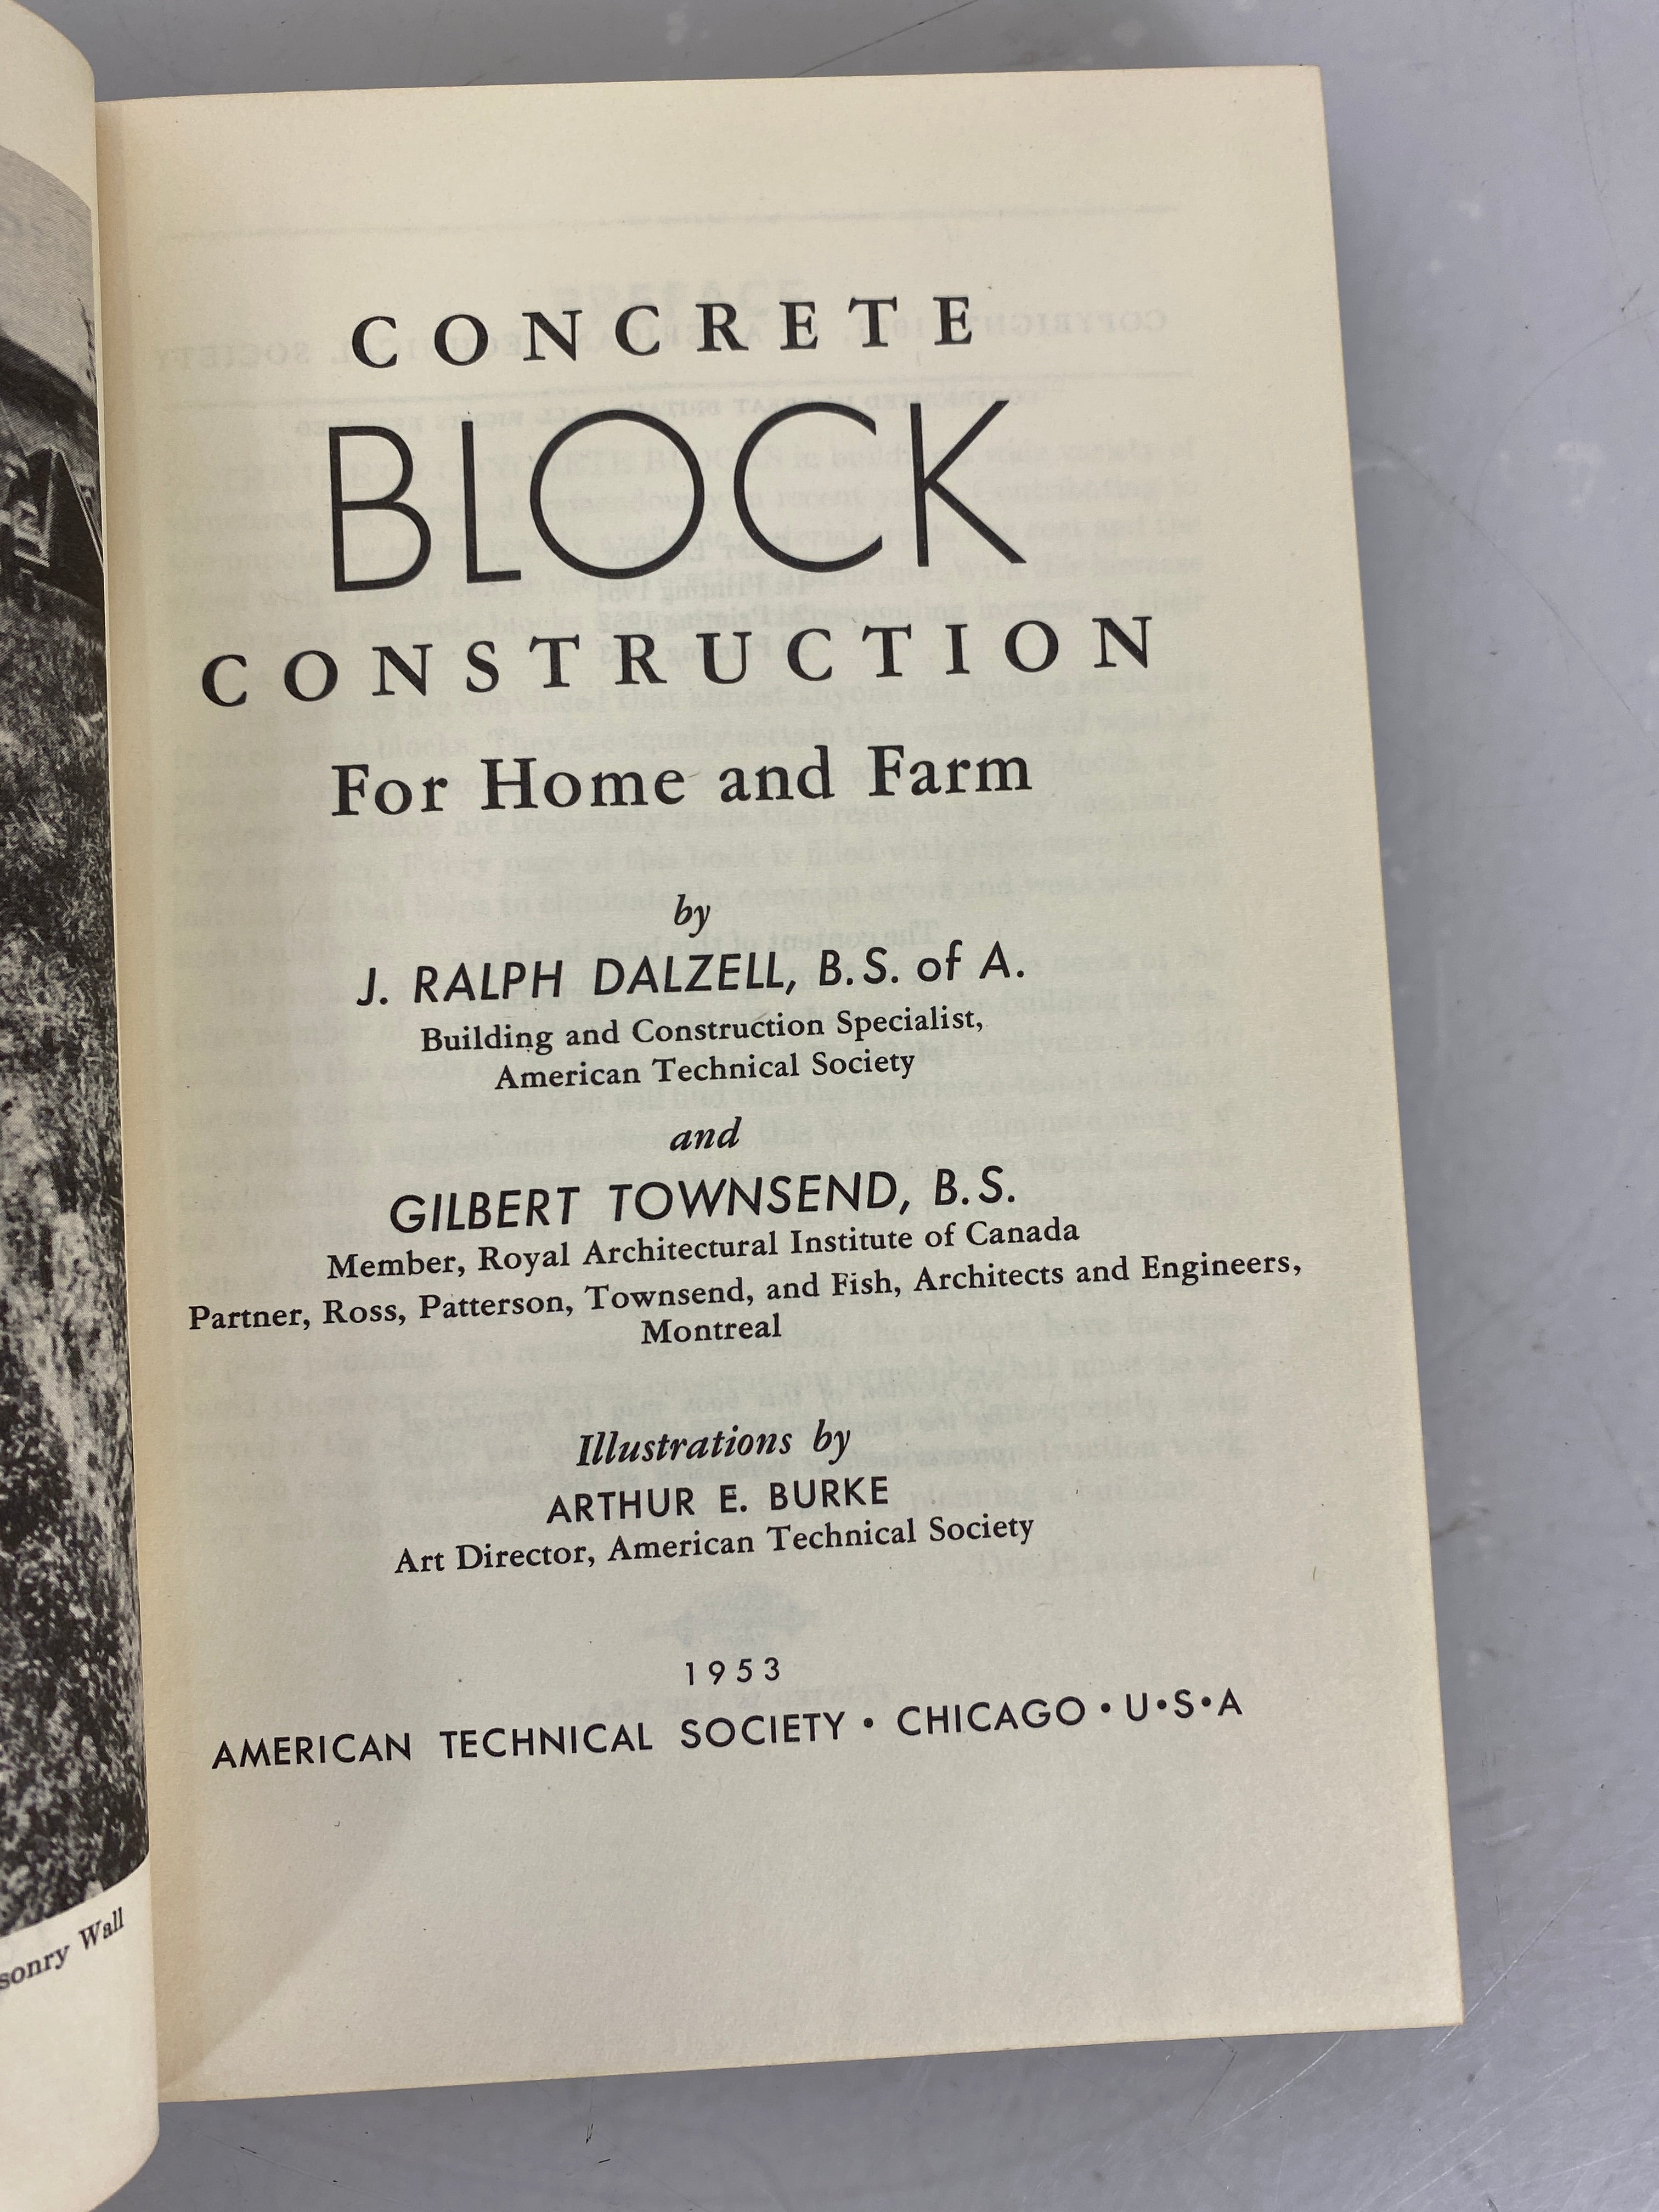 Lot of 2 Building Books: How to Plan a House (1961) and Concrete Block Construction (1953-1st) by Townsend and Dalzell HC DJ